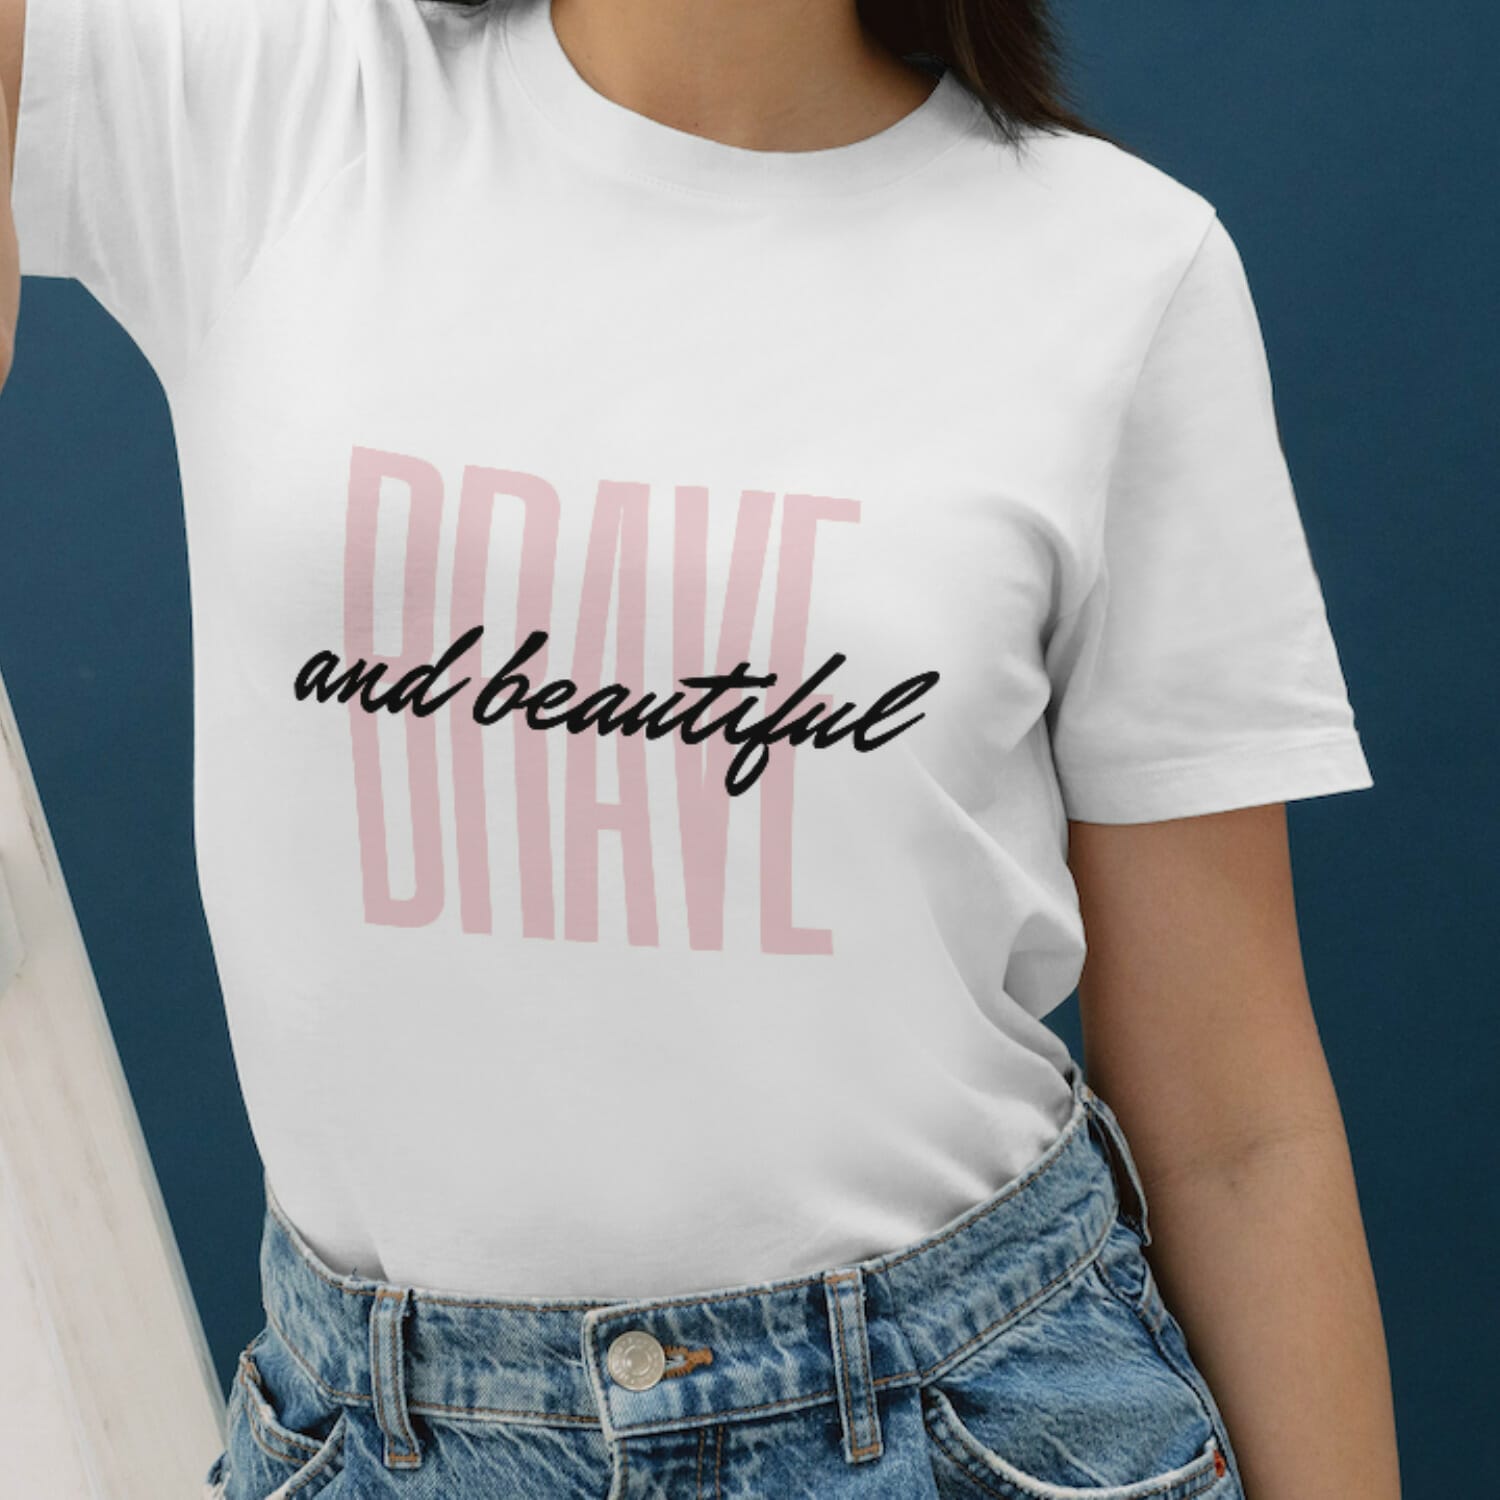 Brave And Beautiful Tshirt Design For Women